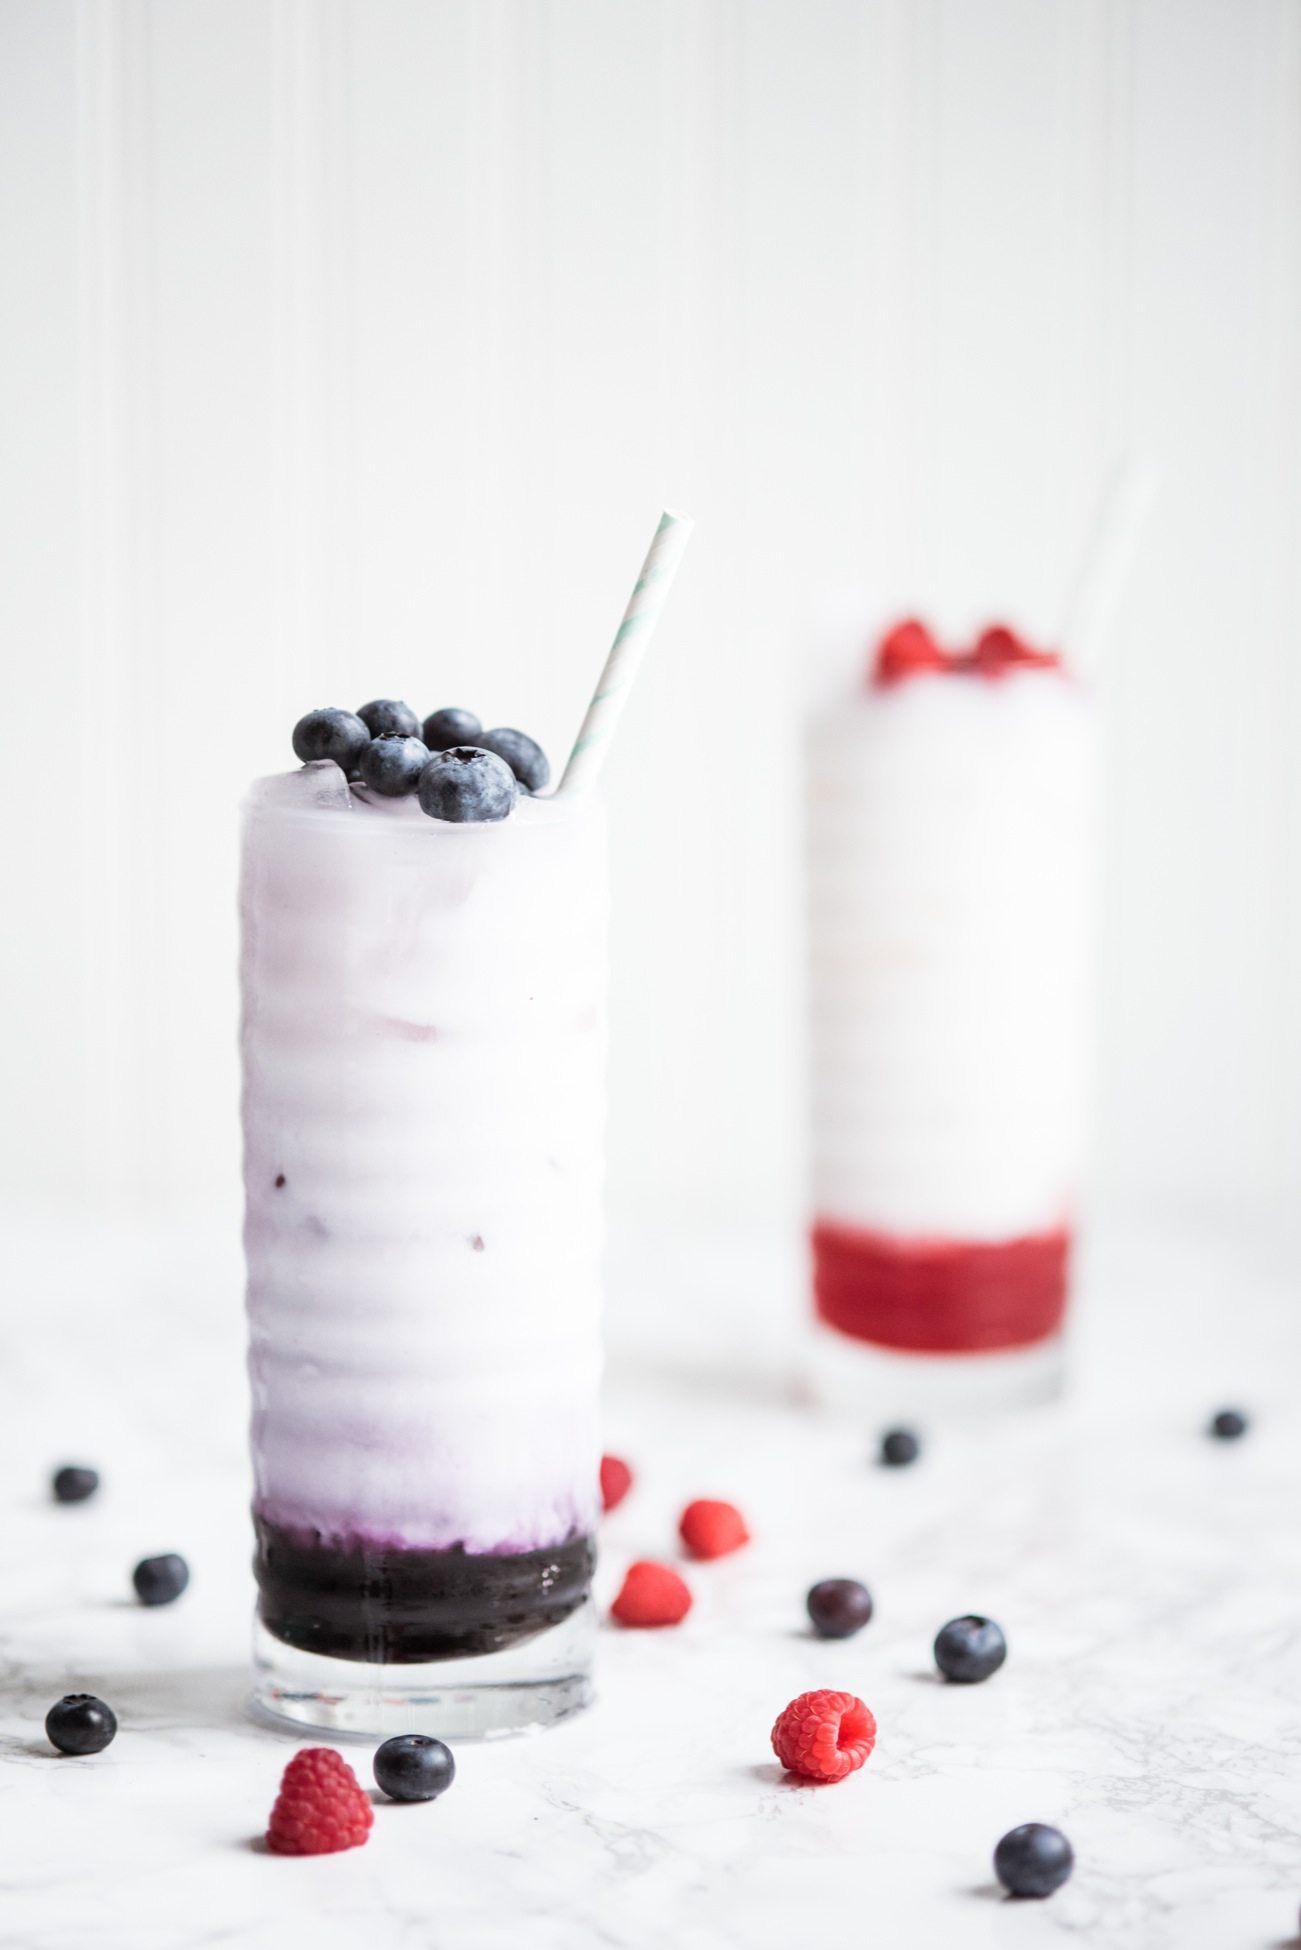 Homemade Italian Soda Recipe | Entertaining tips, party ideas, 4th of July ideas, party themes, party recipes and more from @cydconverse